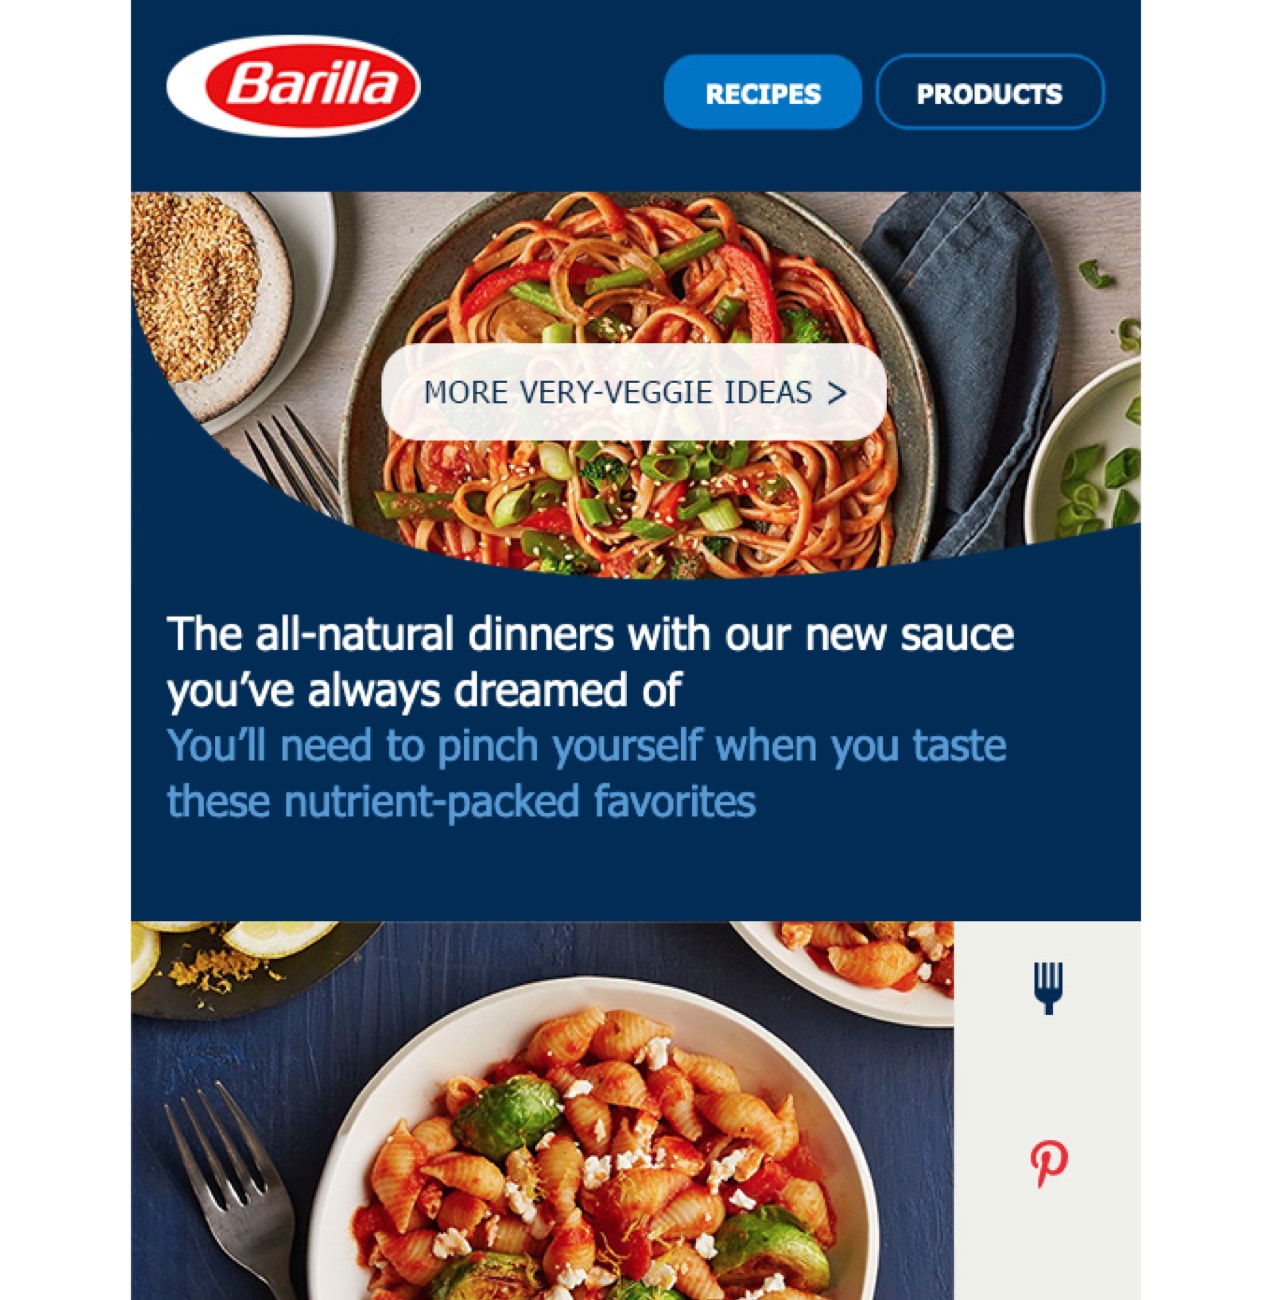 An email from Barilla with recipes